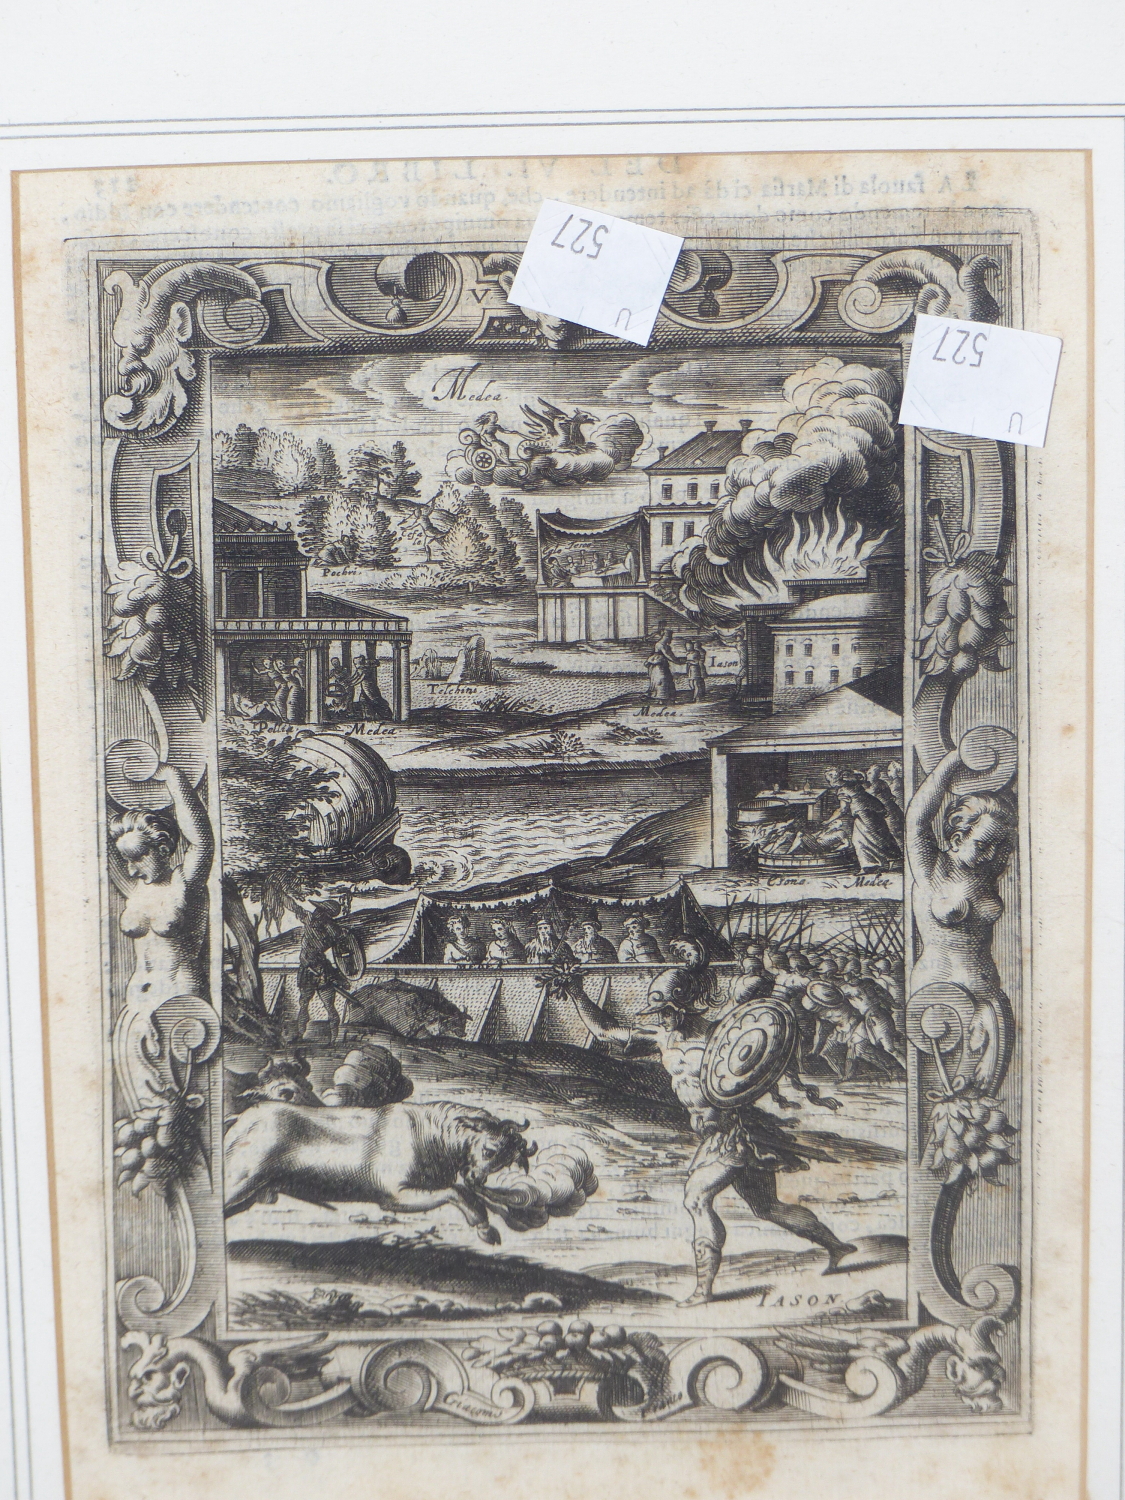 TWO FRAMED ENGRAVED BOOK PLATES DEPICTING JASON AND THE COLCHIS BULLS AND CADMUS SLAYING THE DRAGON,